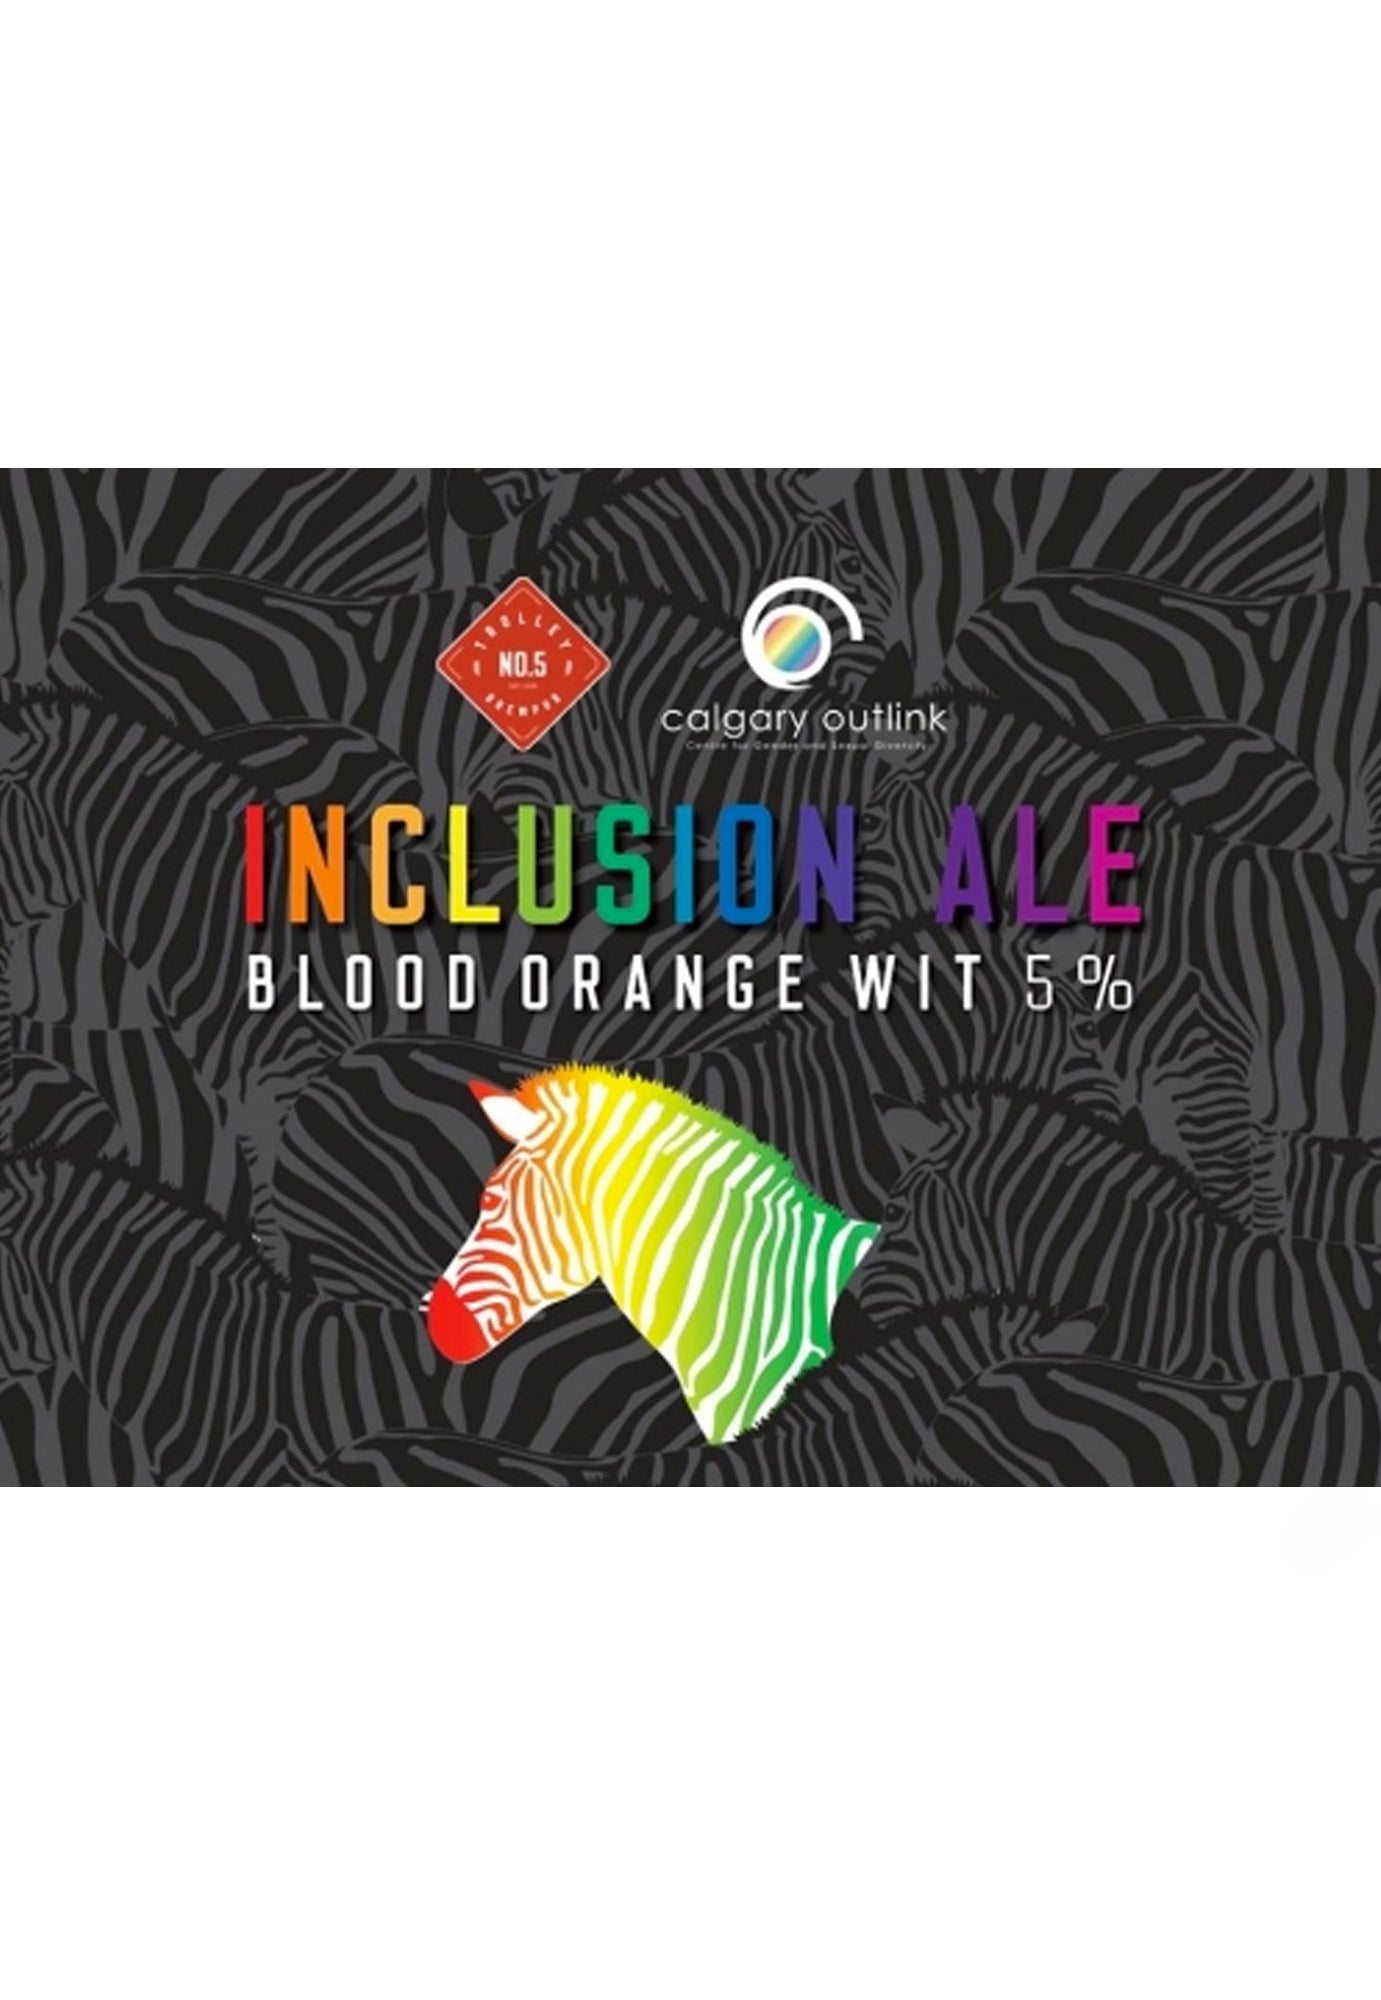 Trolley 5 Inclusion Blood Orange Wit 473 ml -  4 Cans